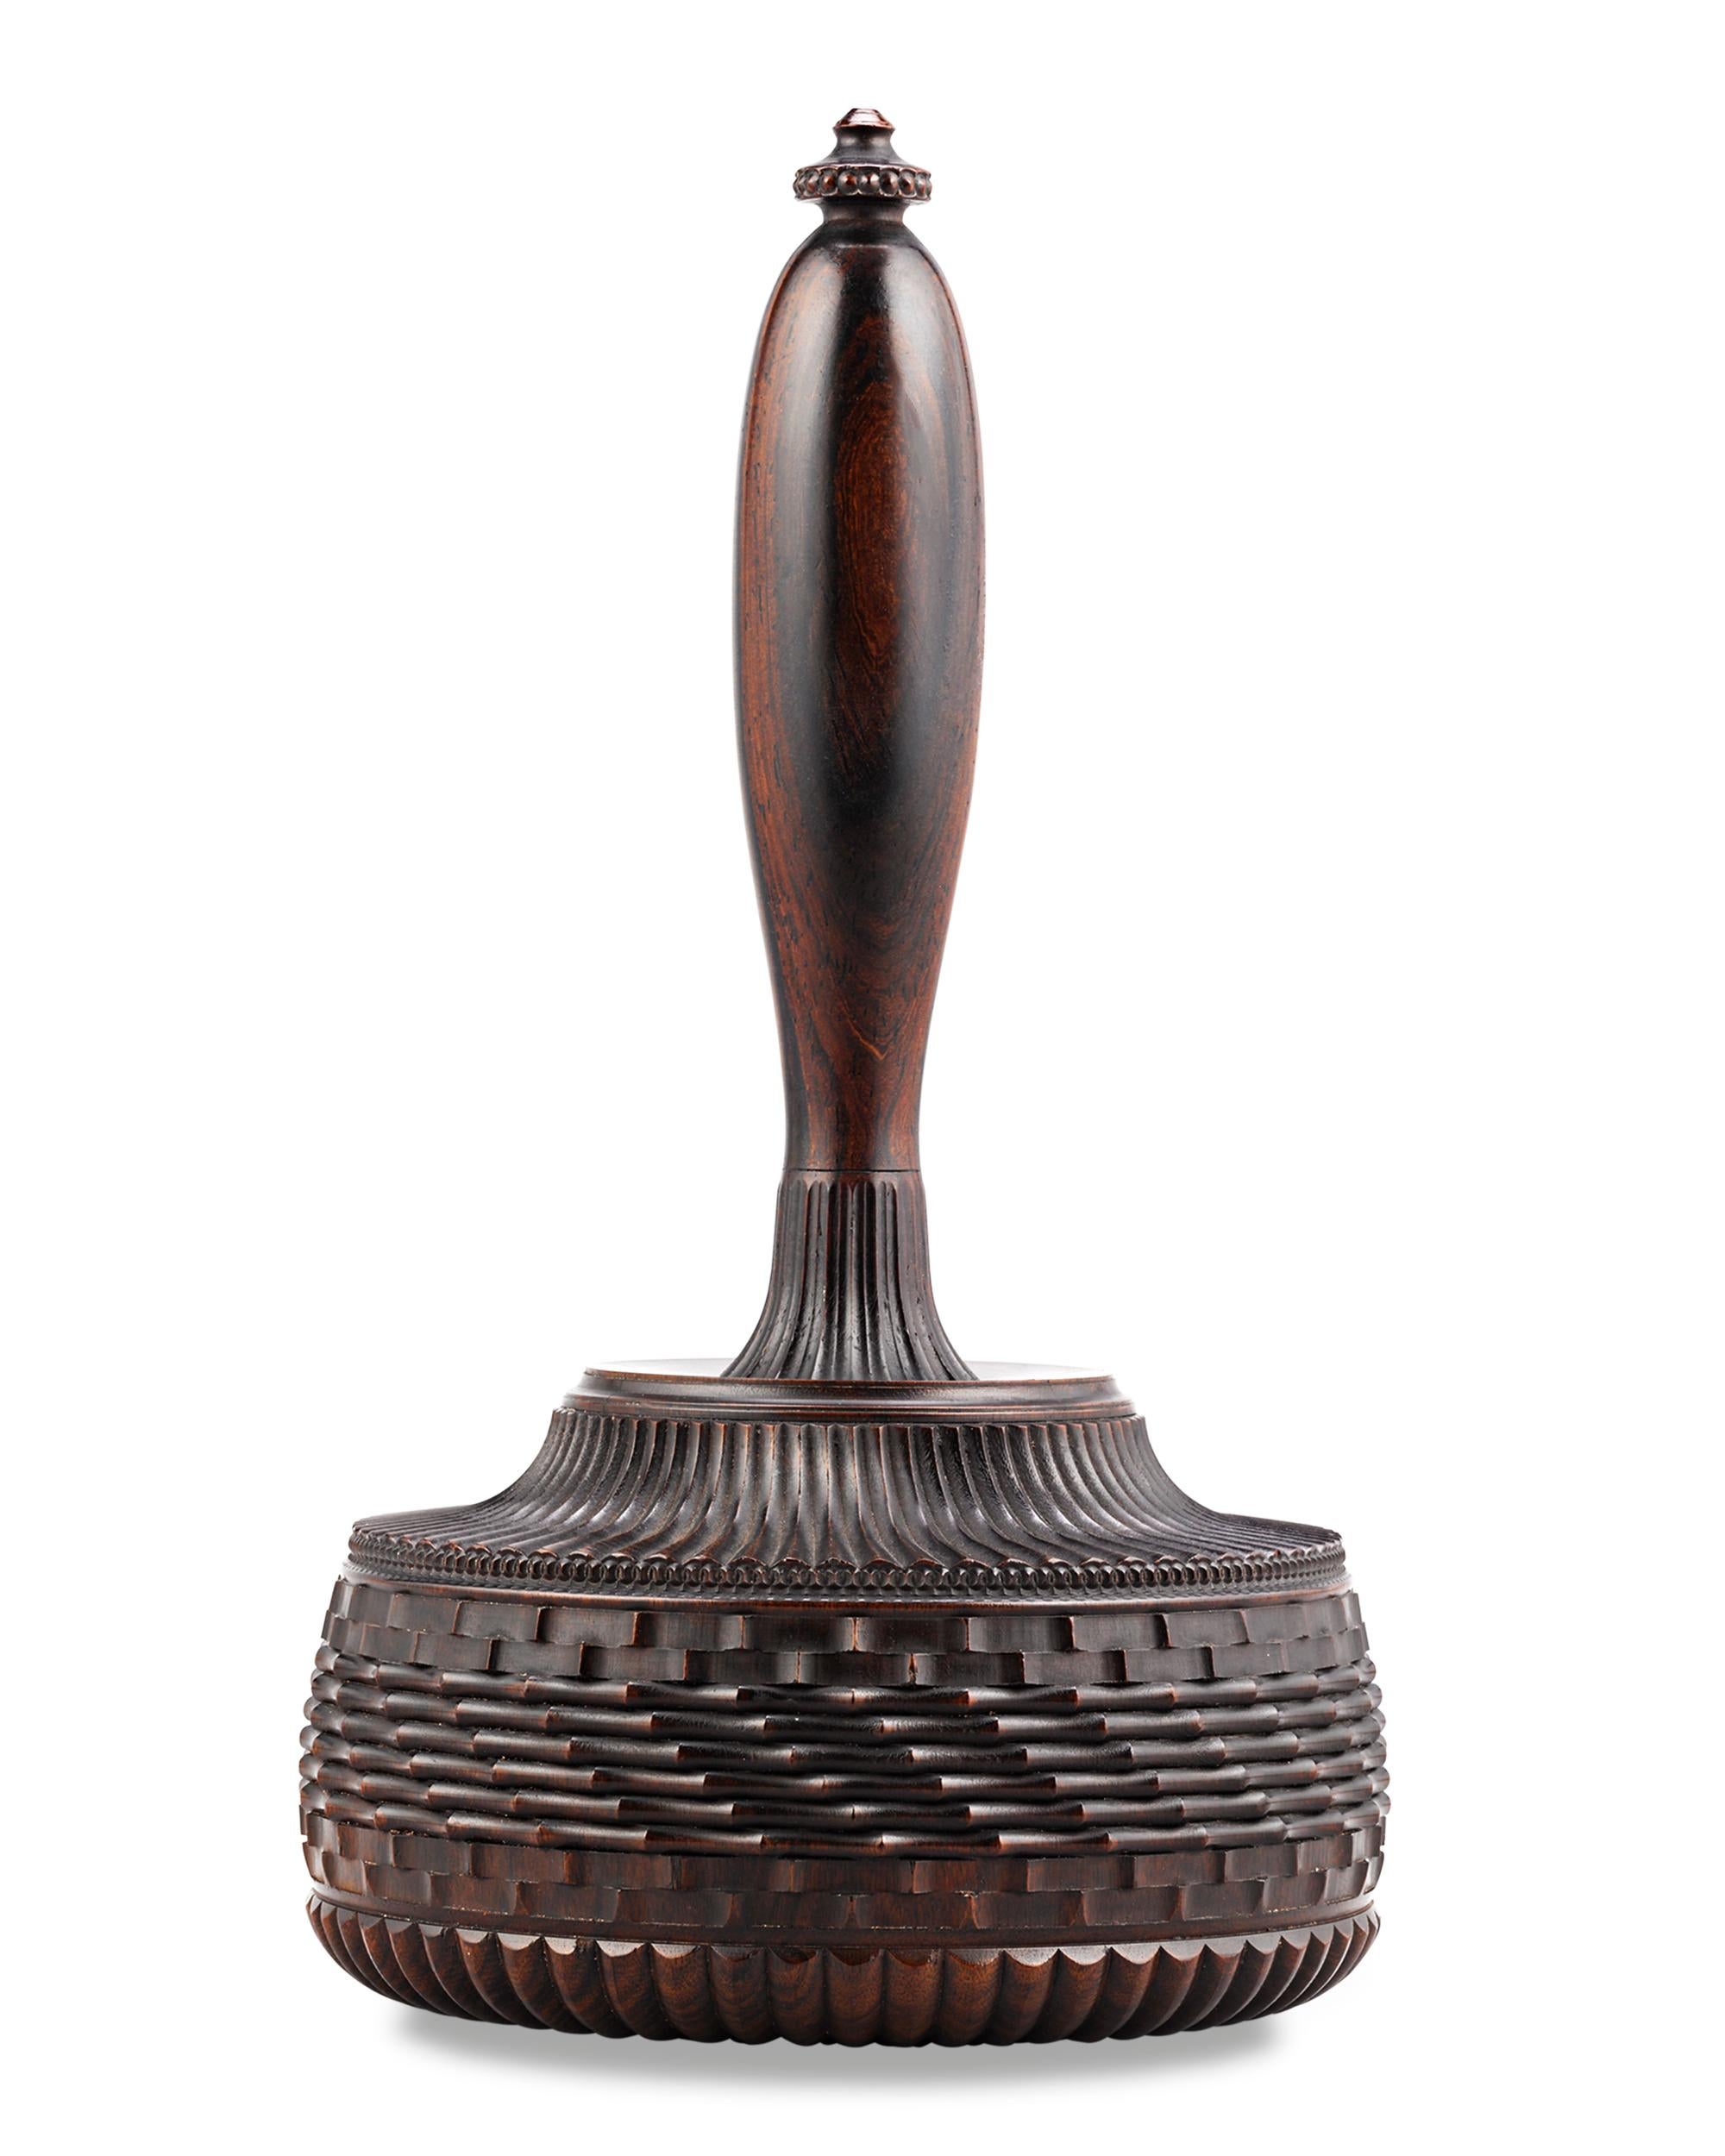 This exceptional and one-of-a-kind wooden mallet commemorates the marriage of Queen Victoria and Prince Albert, which occurred on February 10, 1840. Exquisitely carved into its base are portrait busts of the young royals in their wedding garb,